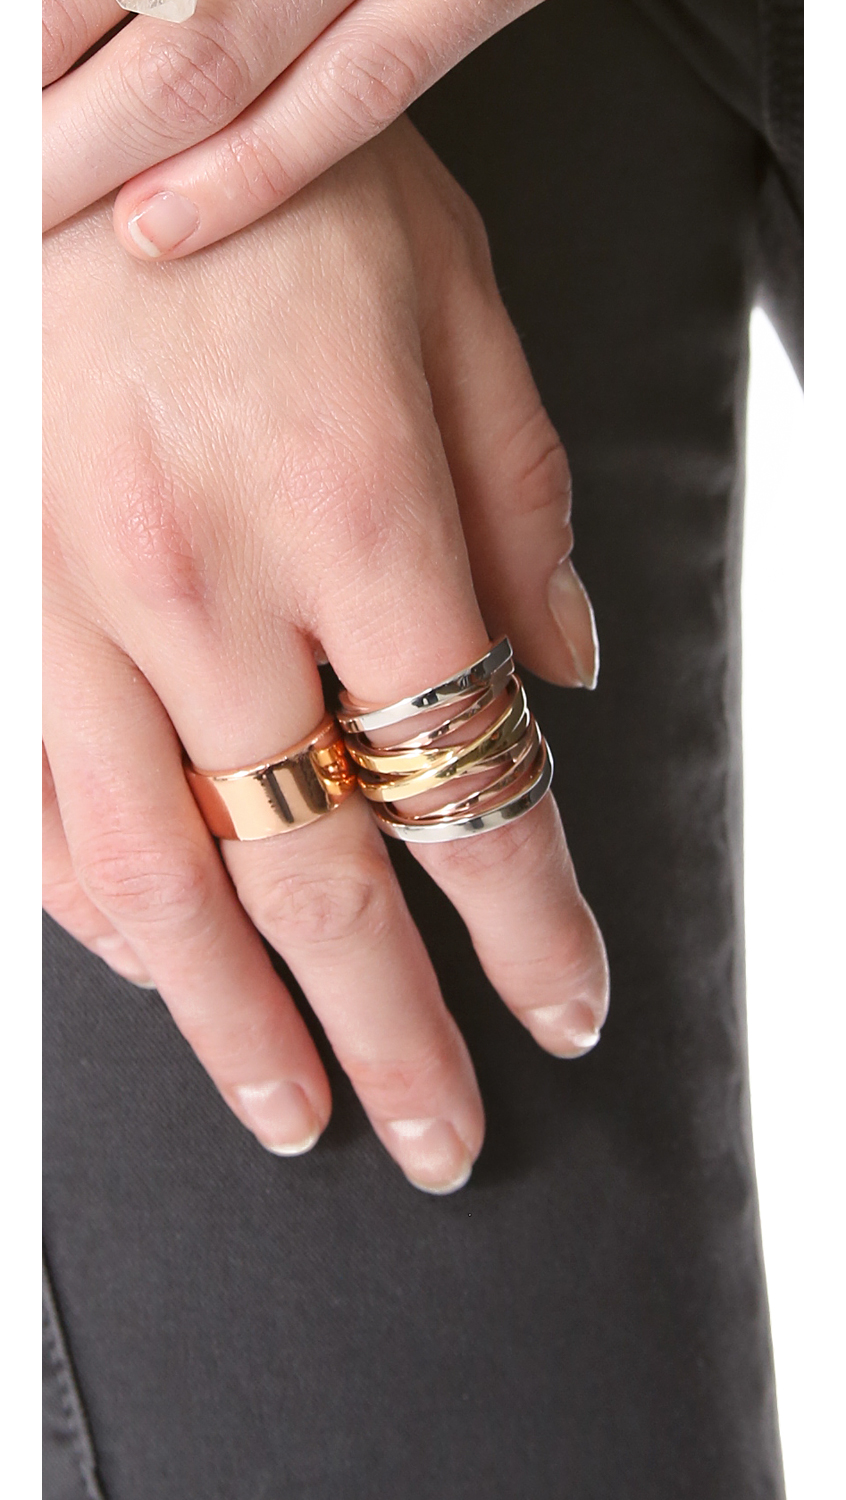 Michael Kors Brilliance Tritone Intertwined Ring in Gold/Silver/Rose Gold  (Metallic) - Lyst